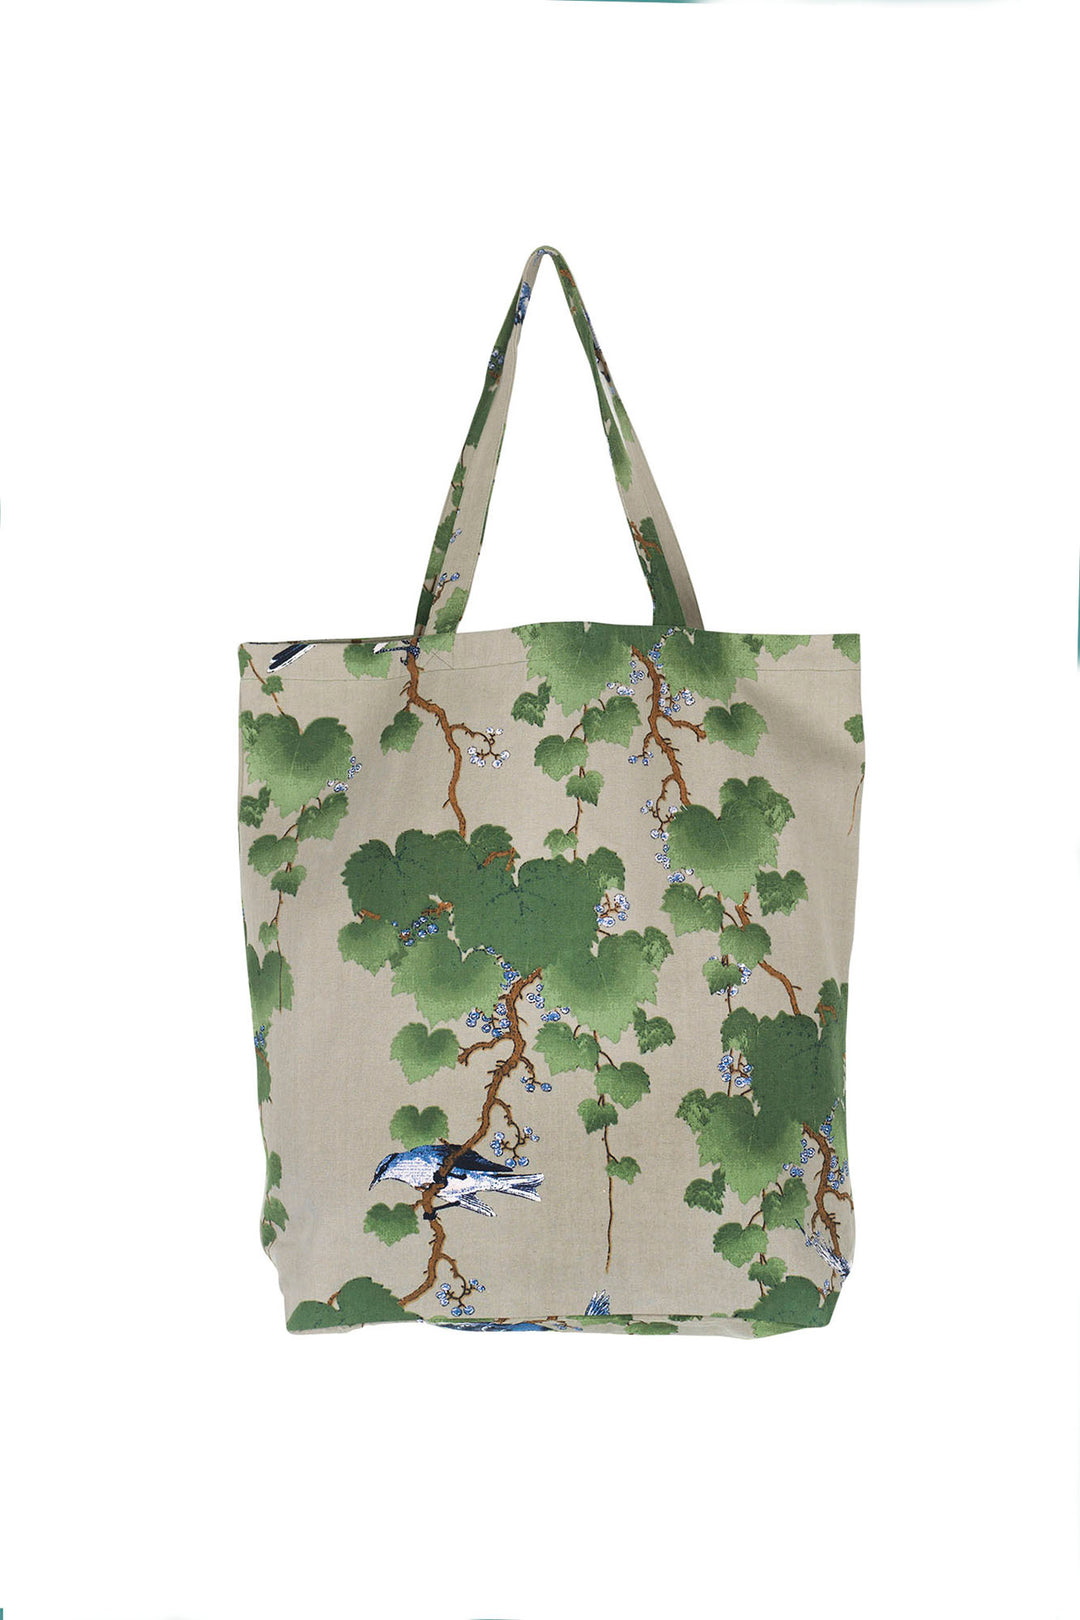 Ladies canvas tote bag with green maple leafs on a stone background by One Hundred Stars